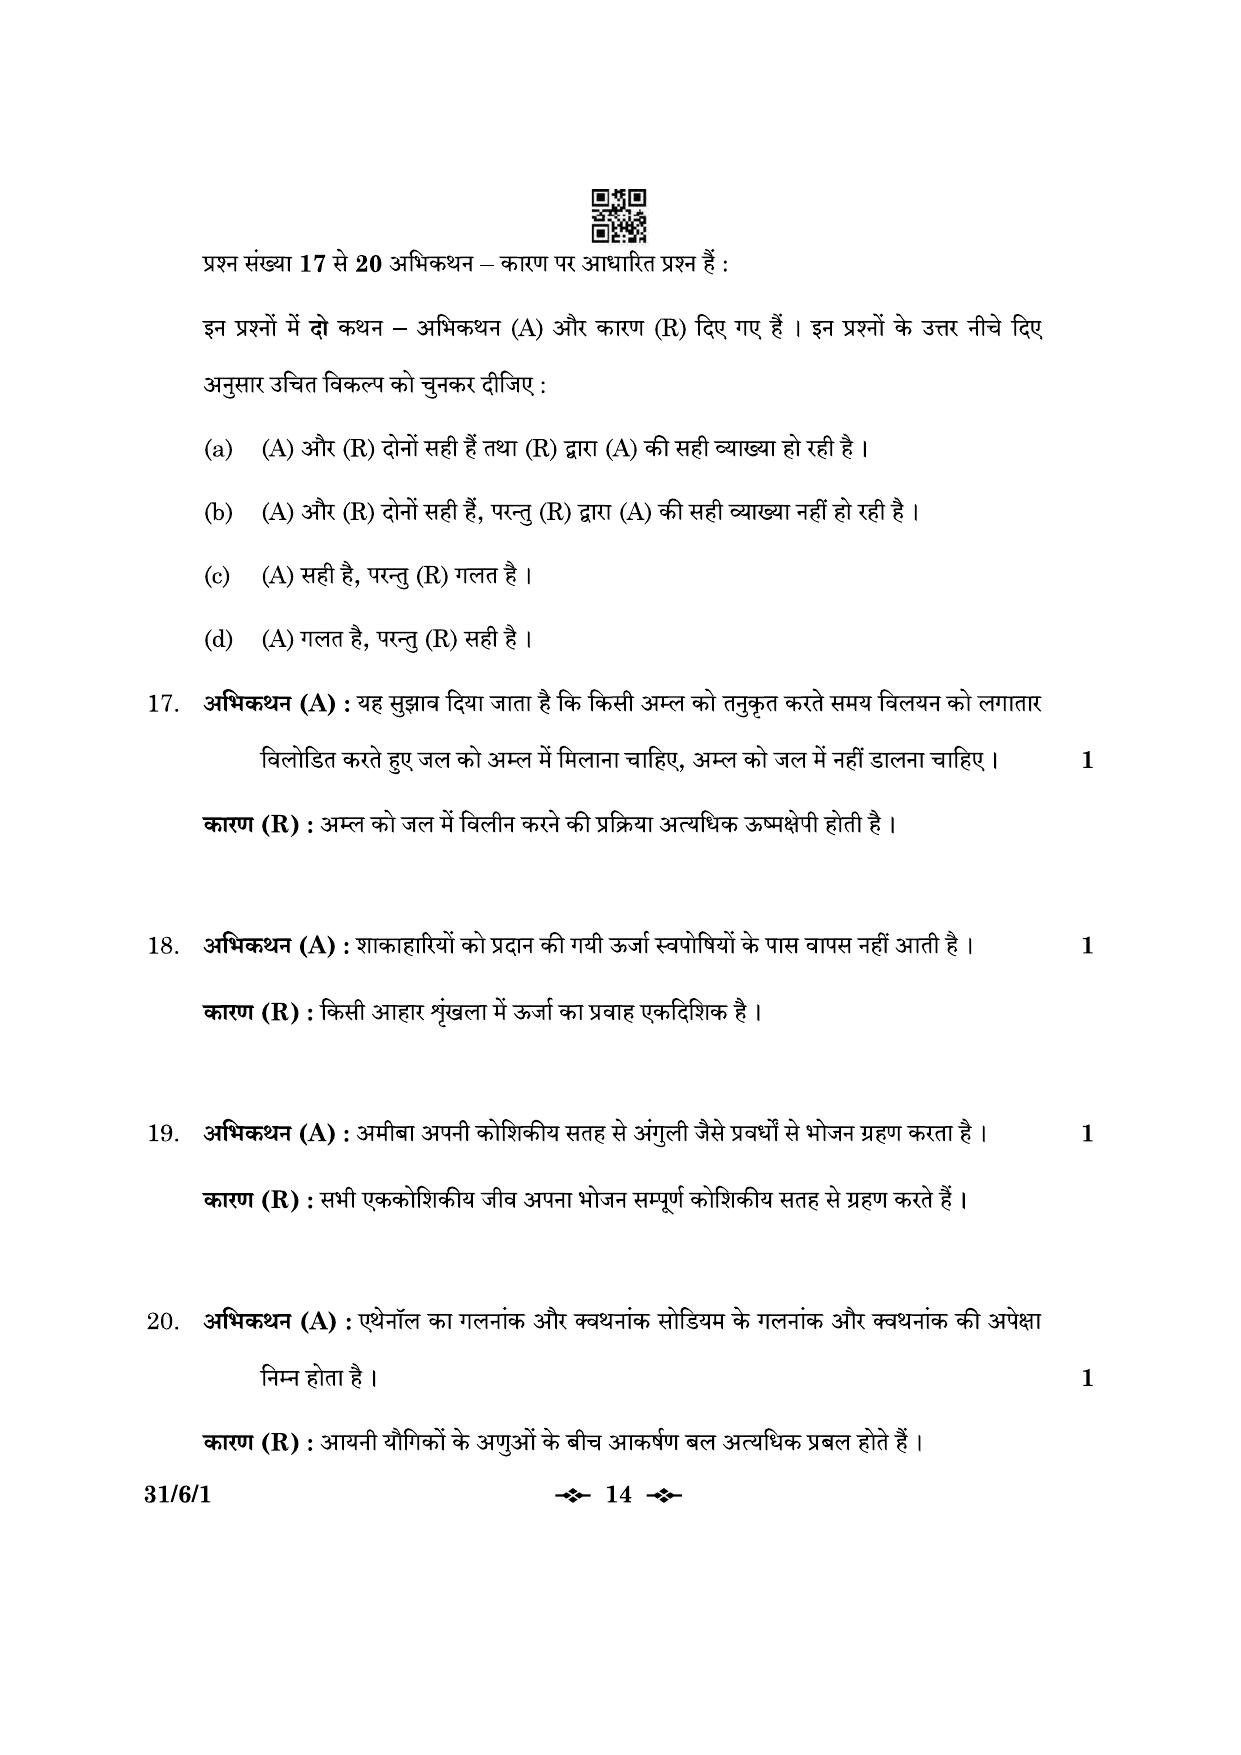 CBSE Class 10 31-6-1 Science 2023 Question Paper - Page 14